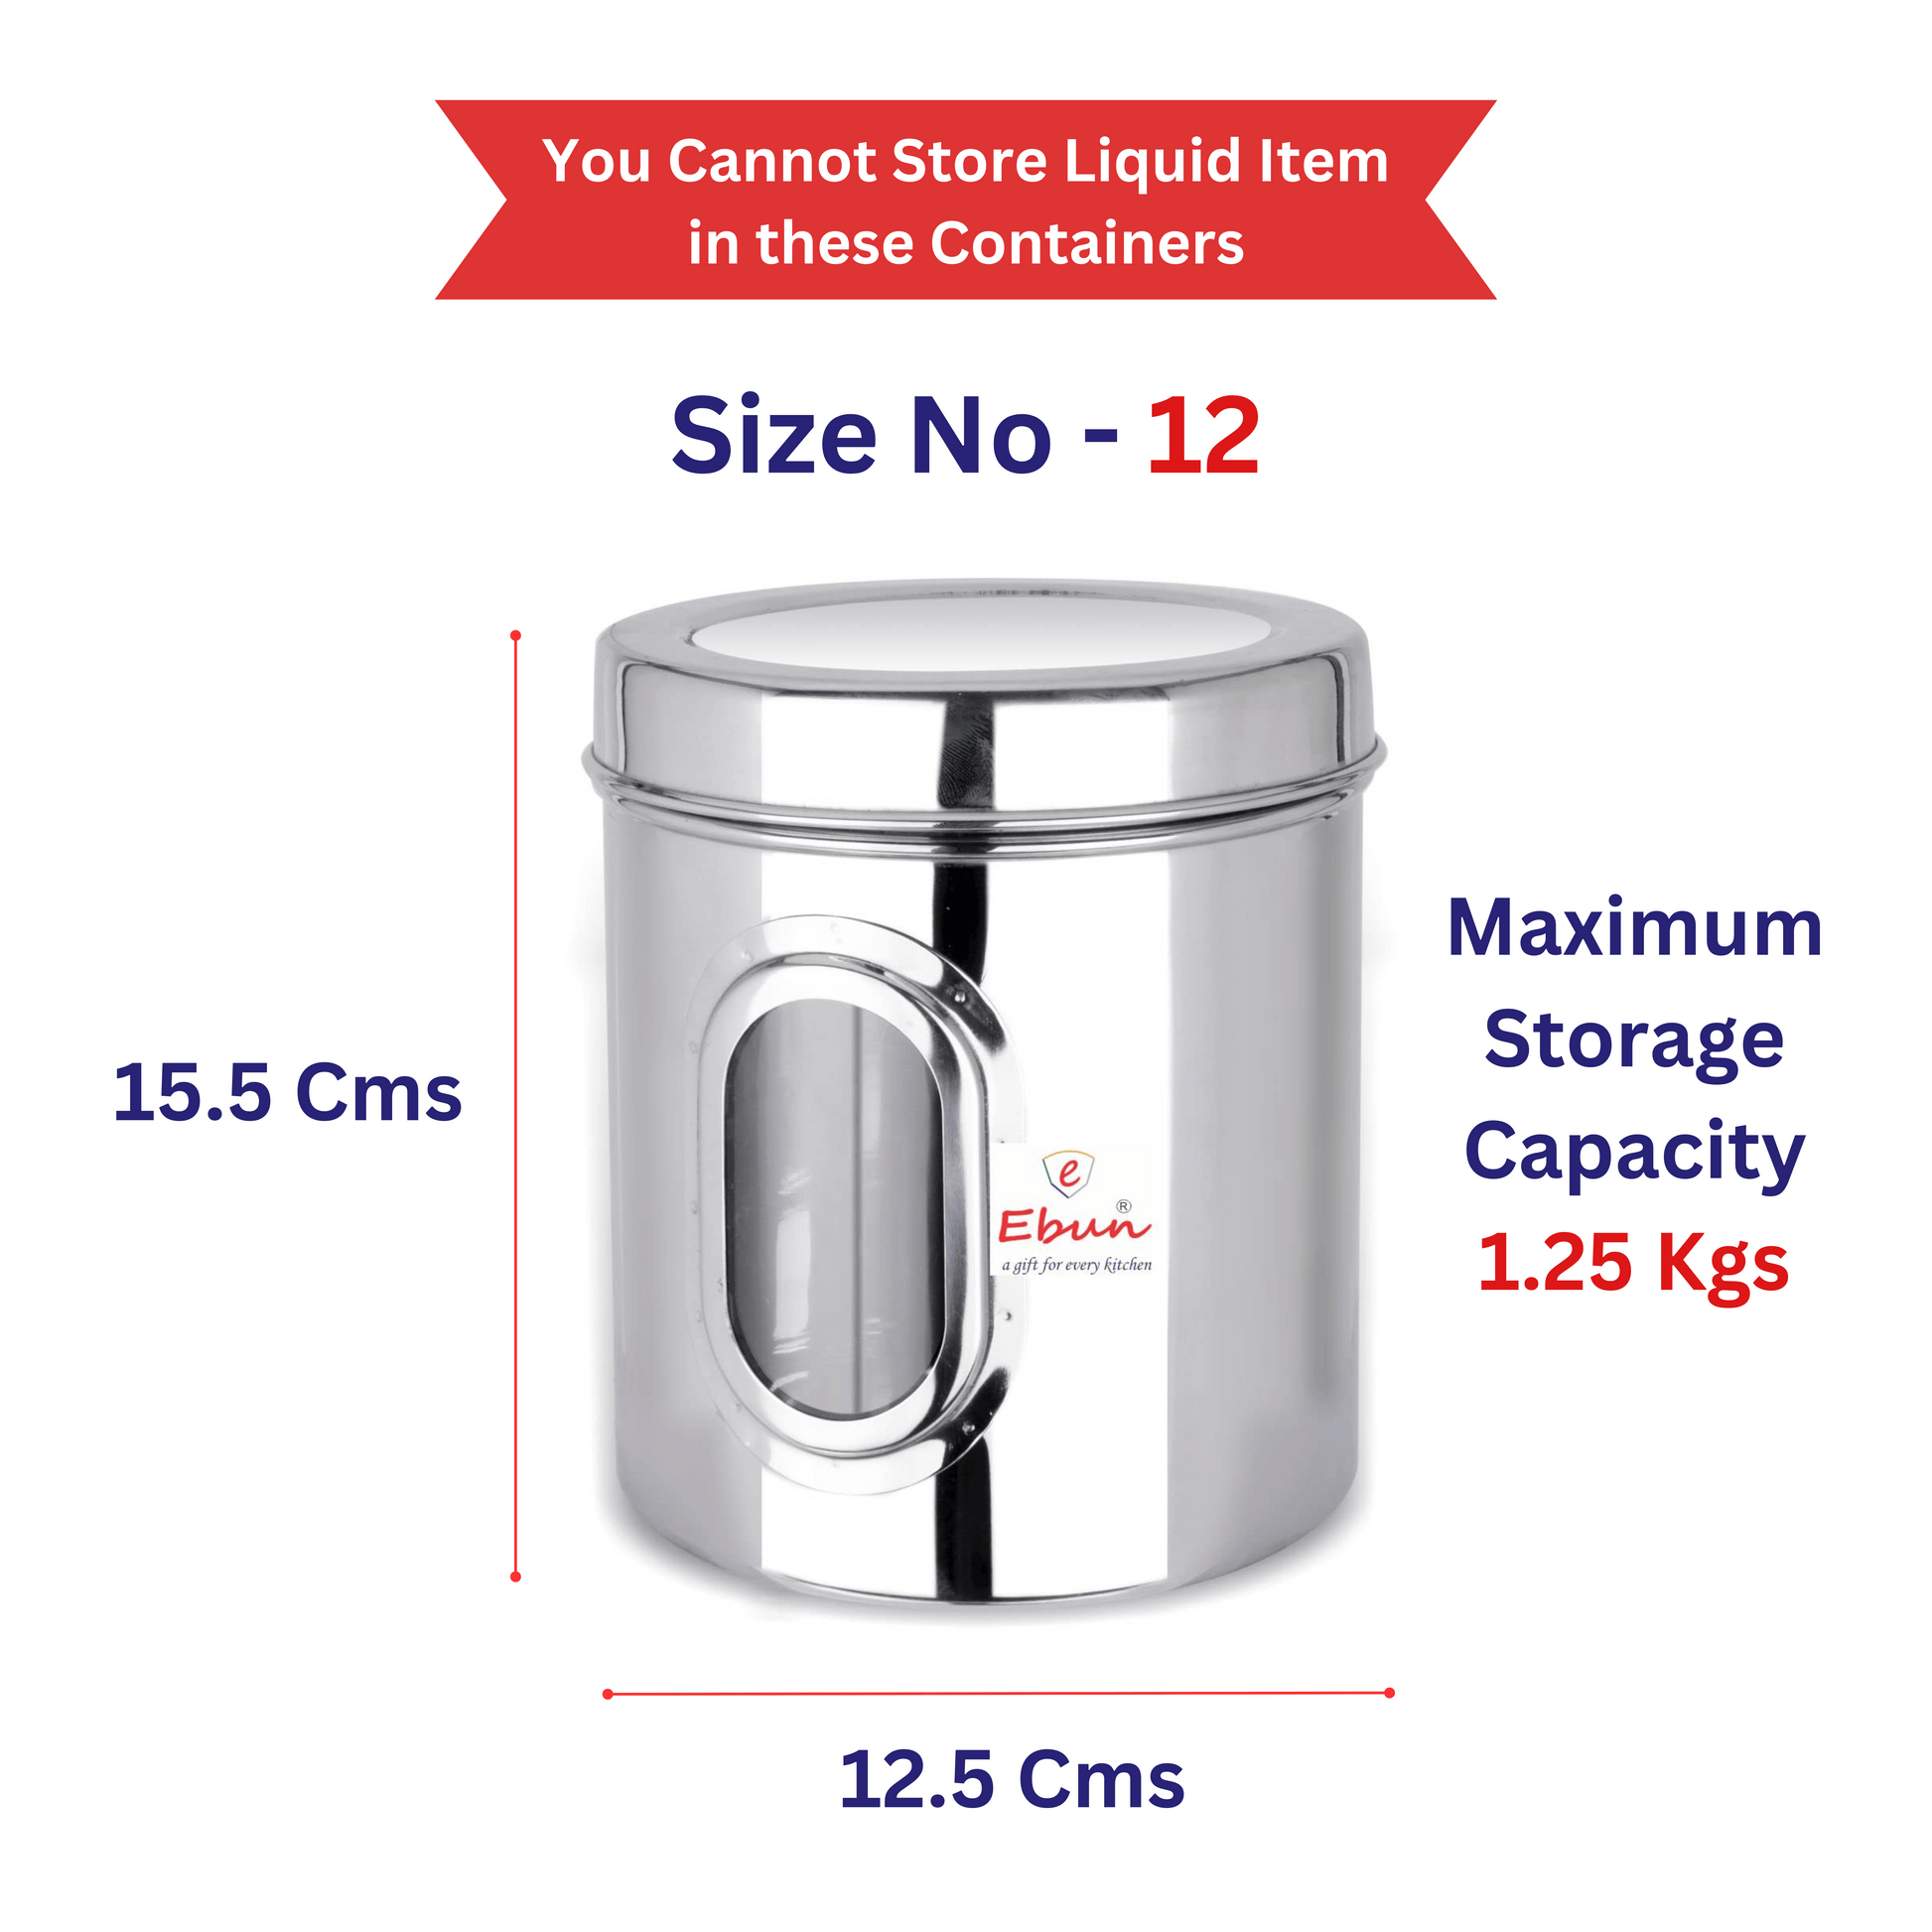 Stainless steel containers for kitchen | stainless steel containers | steel storage containers for kitchen | steel container | steel container with lid | kitchen containers set steel | steel container for kitchen storage set | steel containers | stainless steel storage containers | stainless steel containers with lid | kitchen steel containers set | stainless steel container | steel airtight container | steel storage containers | Steel dabba | steel containers for kitchen 2kg